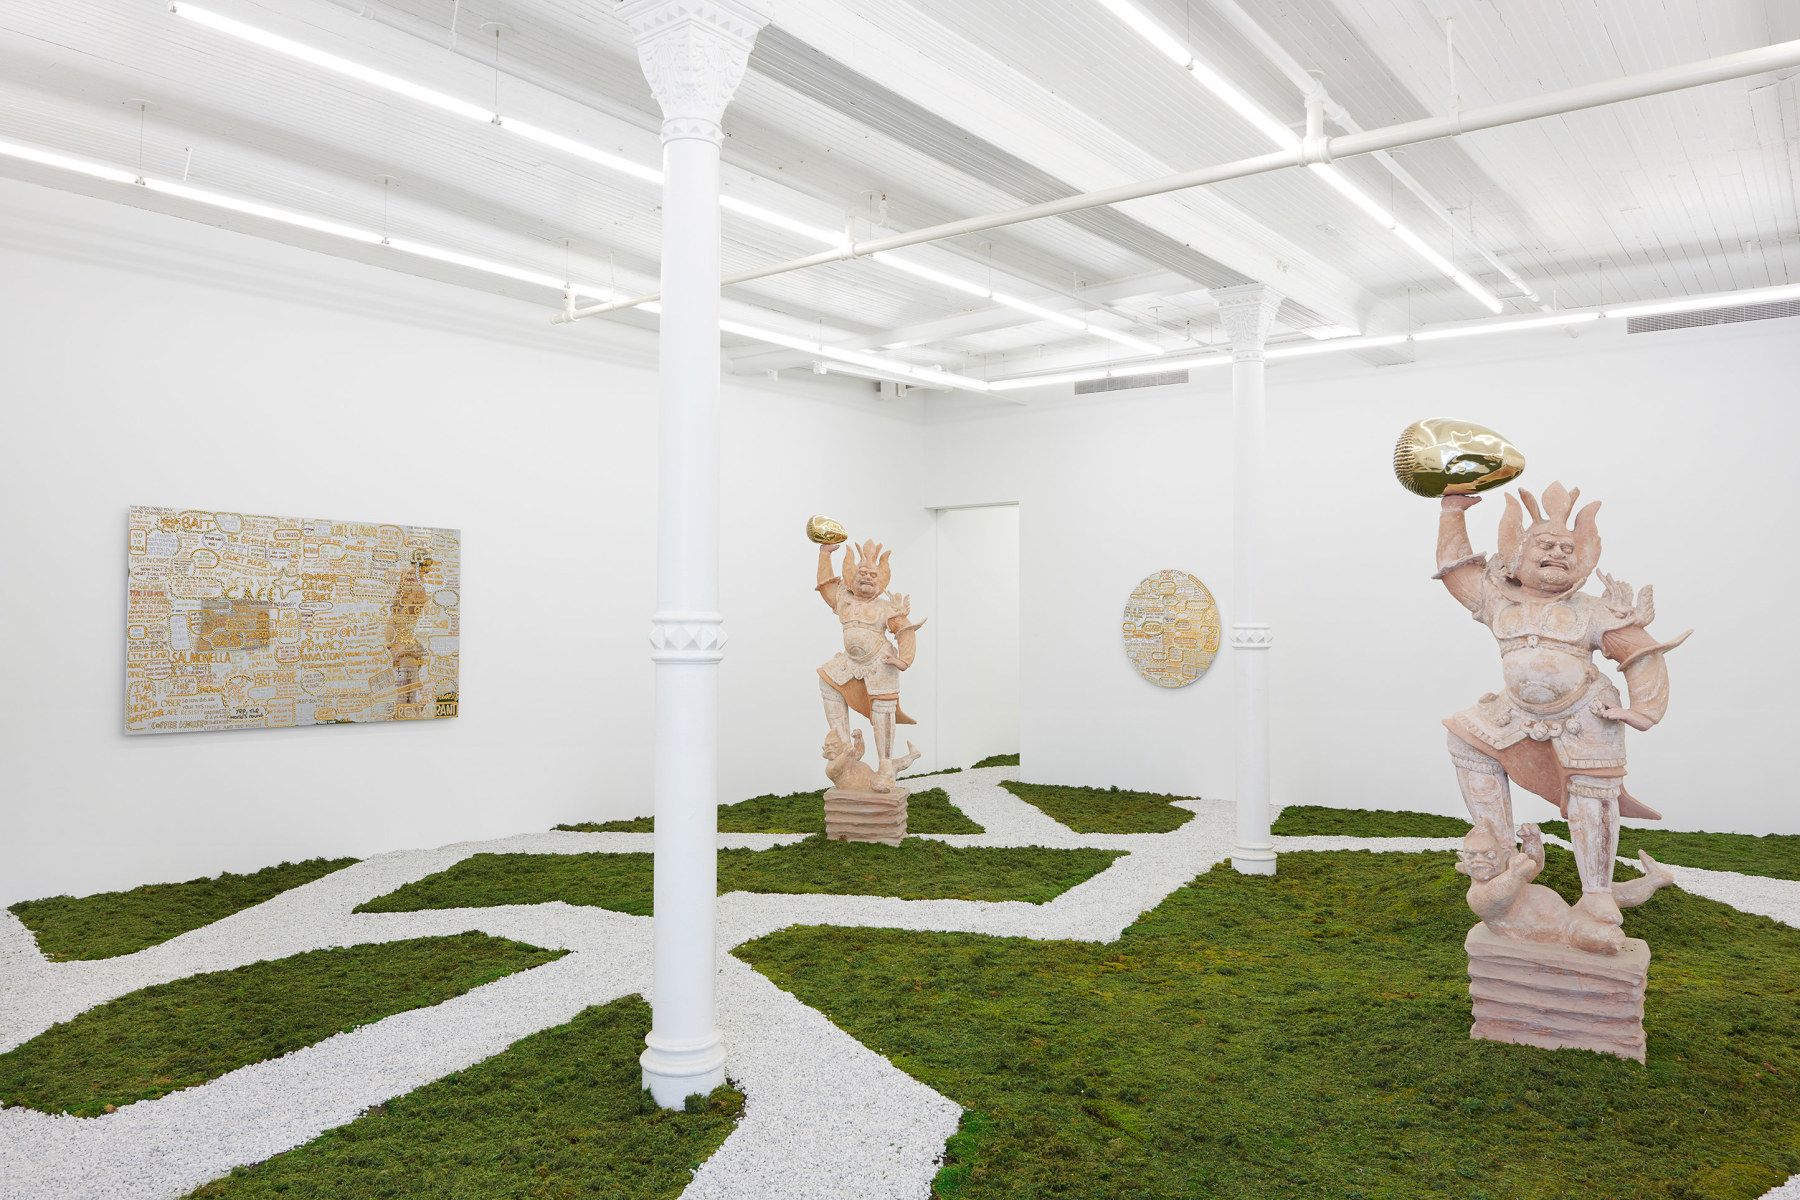 interior space with grass and patches, two bronze sculptures, and two mirror artworks